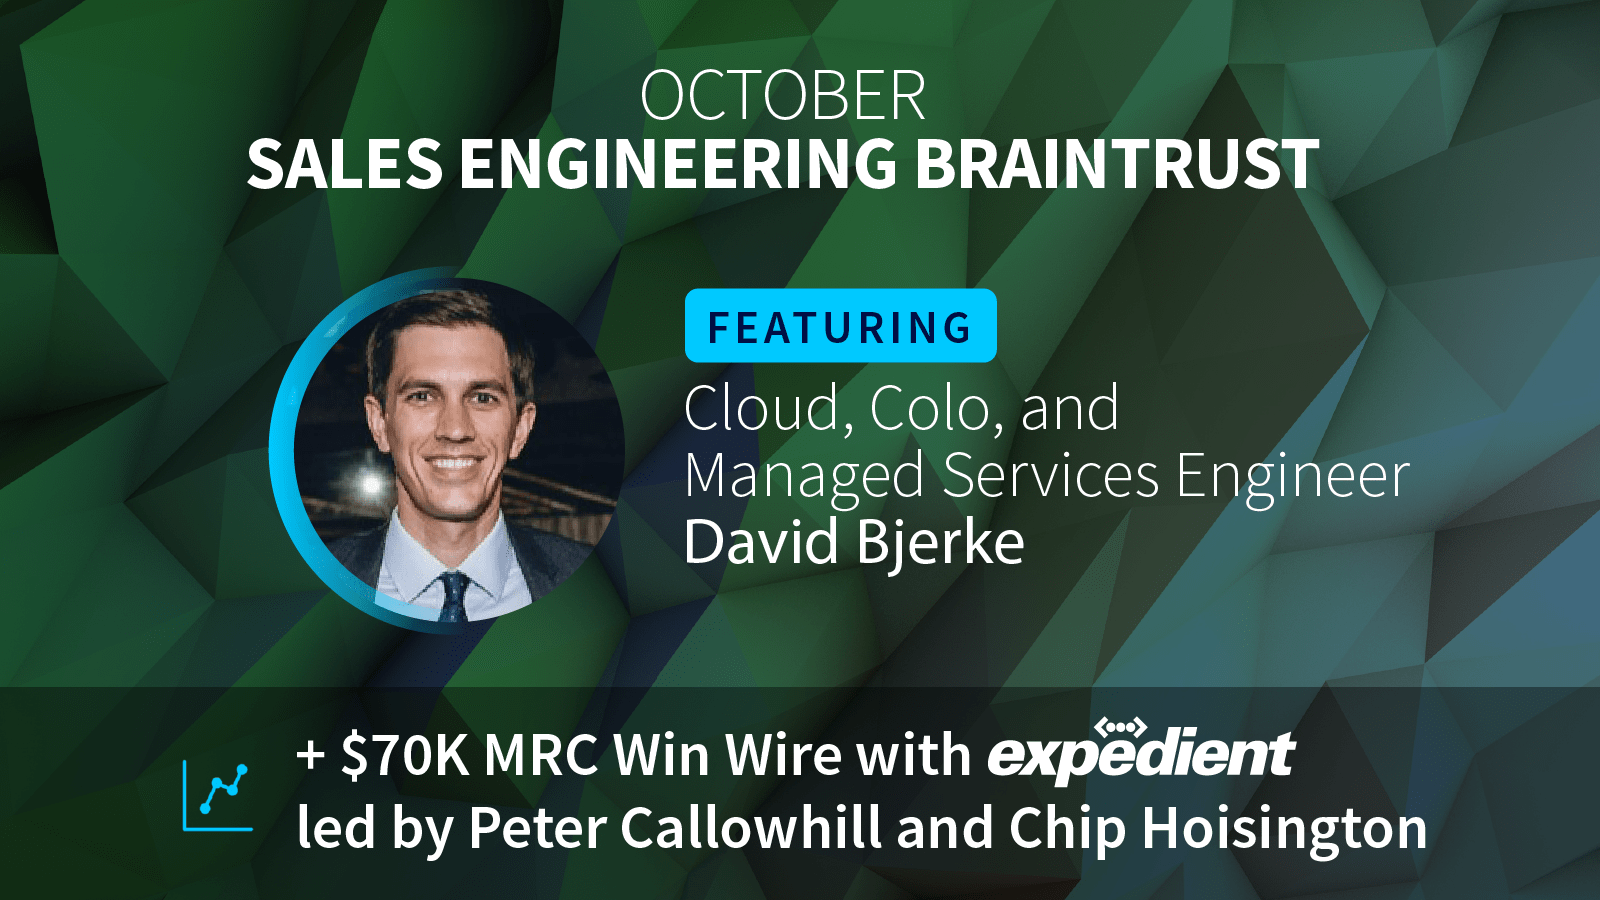 Sales Engineering Braintrust featuring Cloud, Colo, and Managed Services Engineer David Bjerke